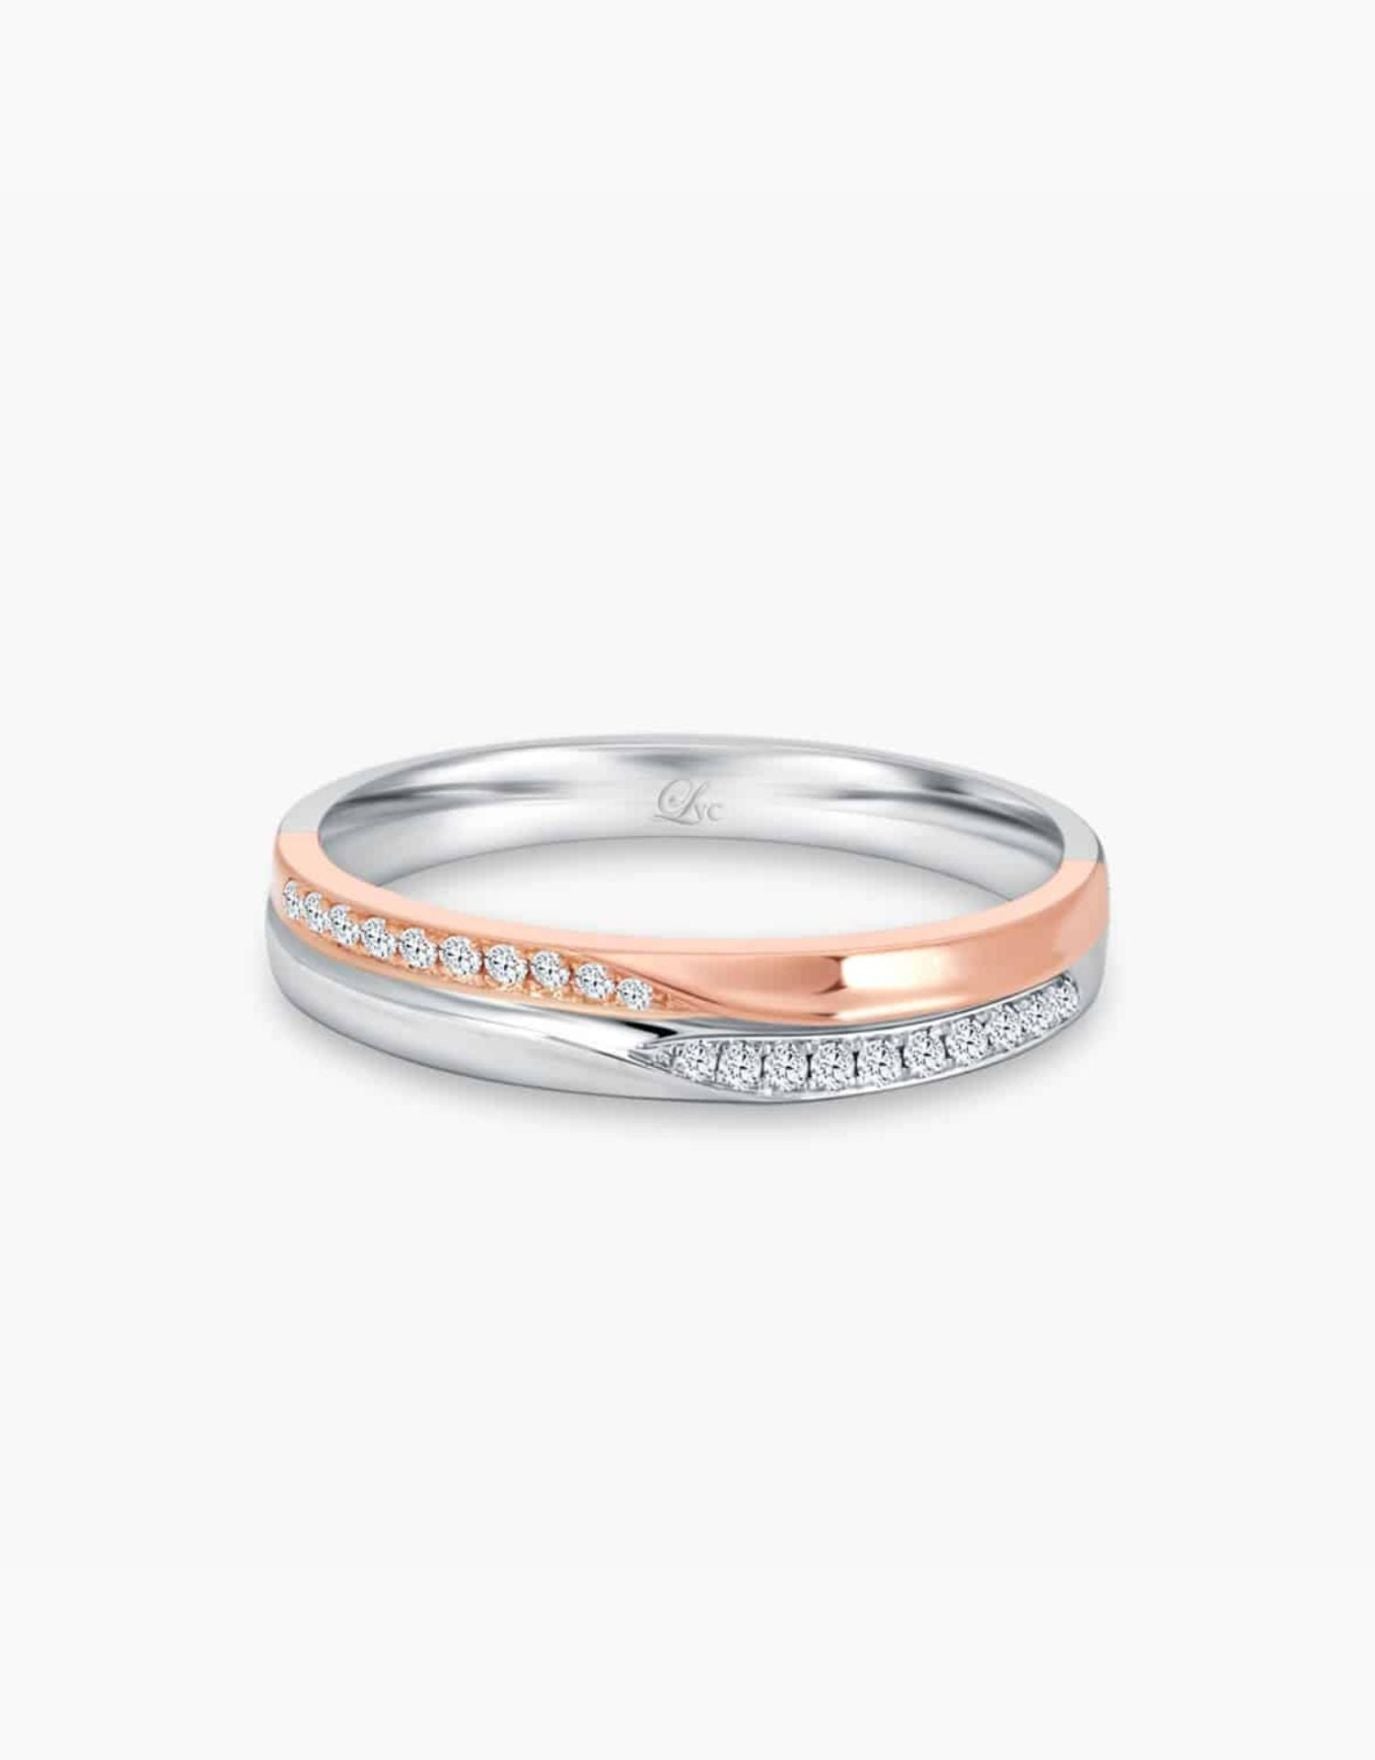 LVC Desirio Wedding Band in White Gold with Rose Gold Band Inlay with Diamonds